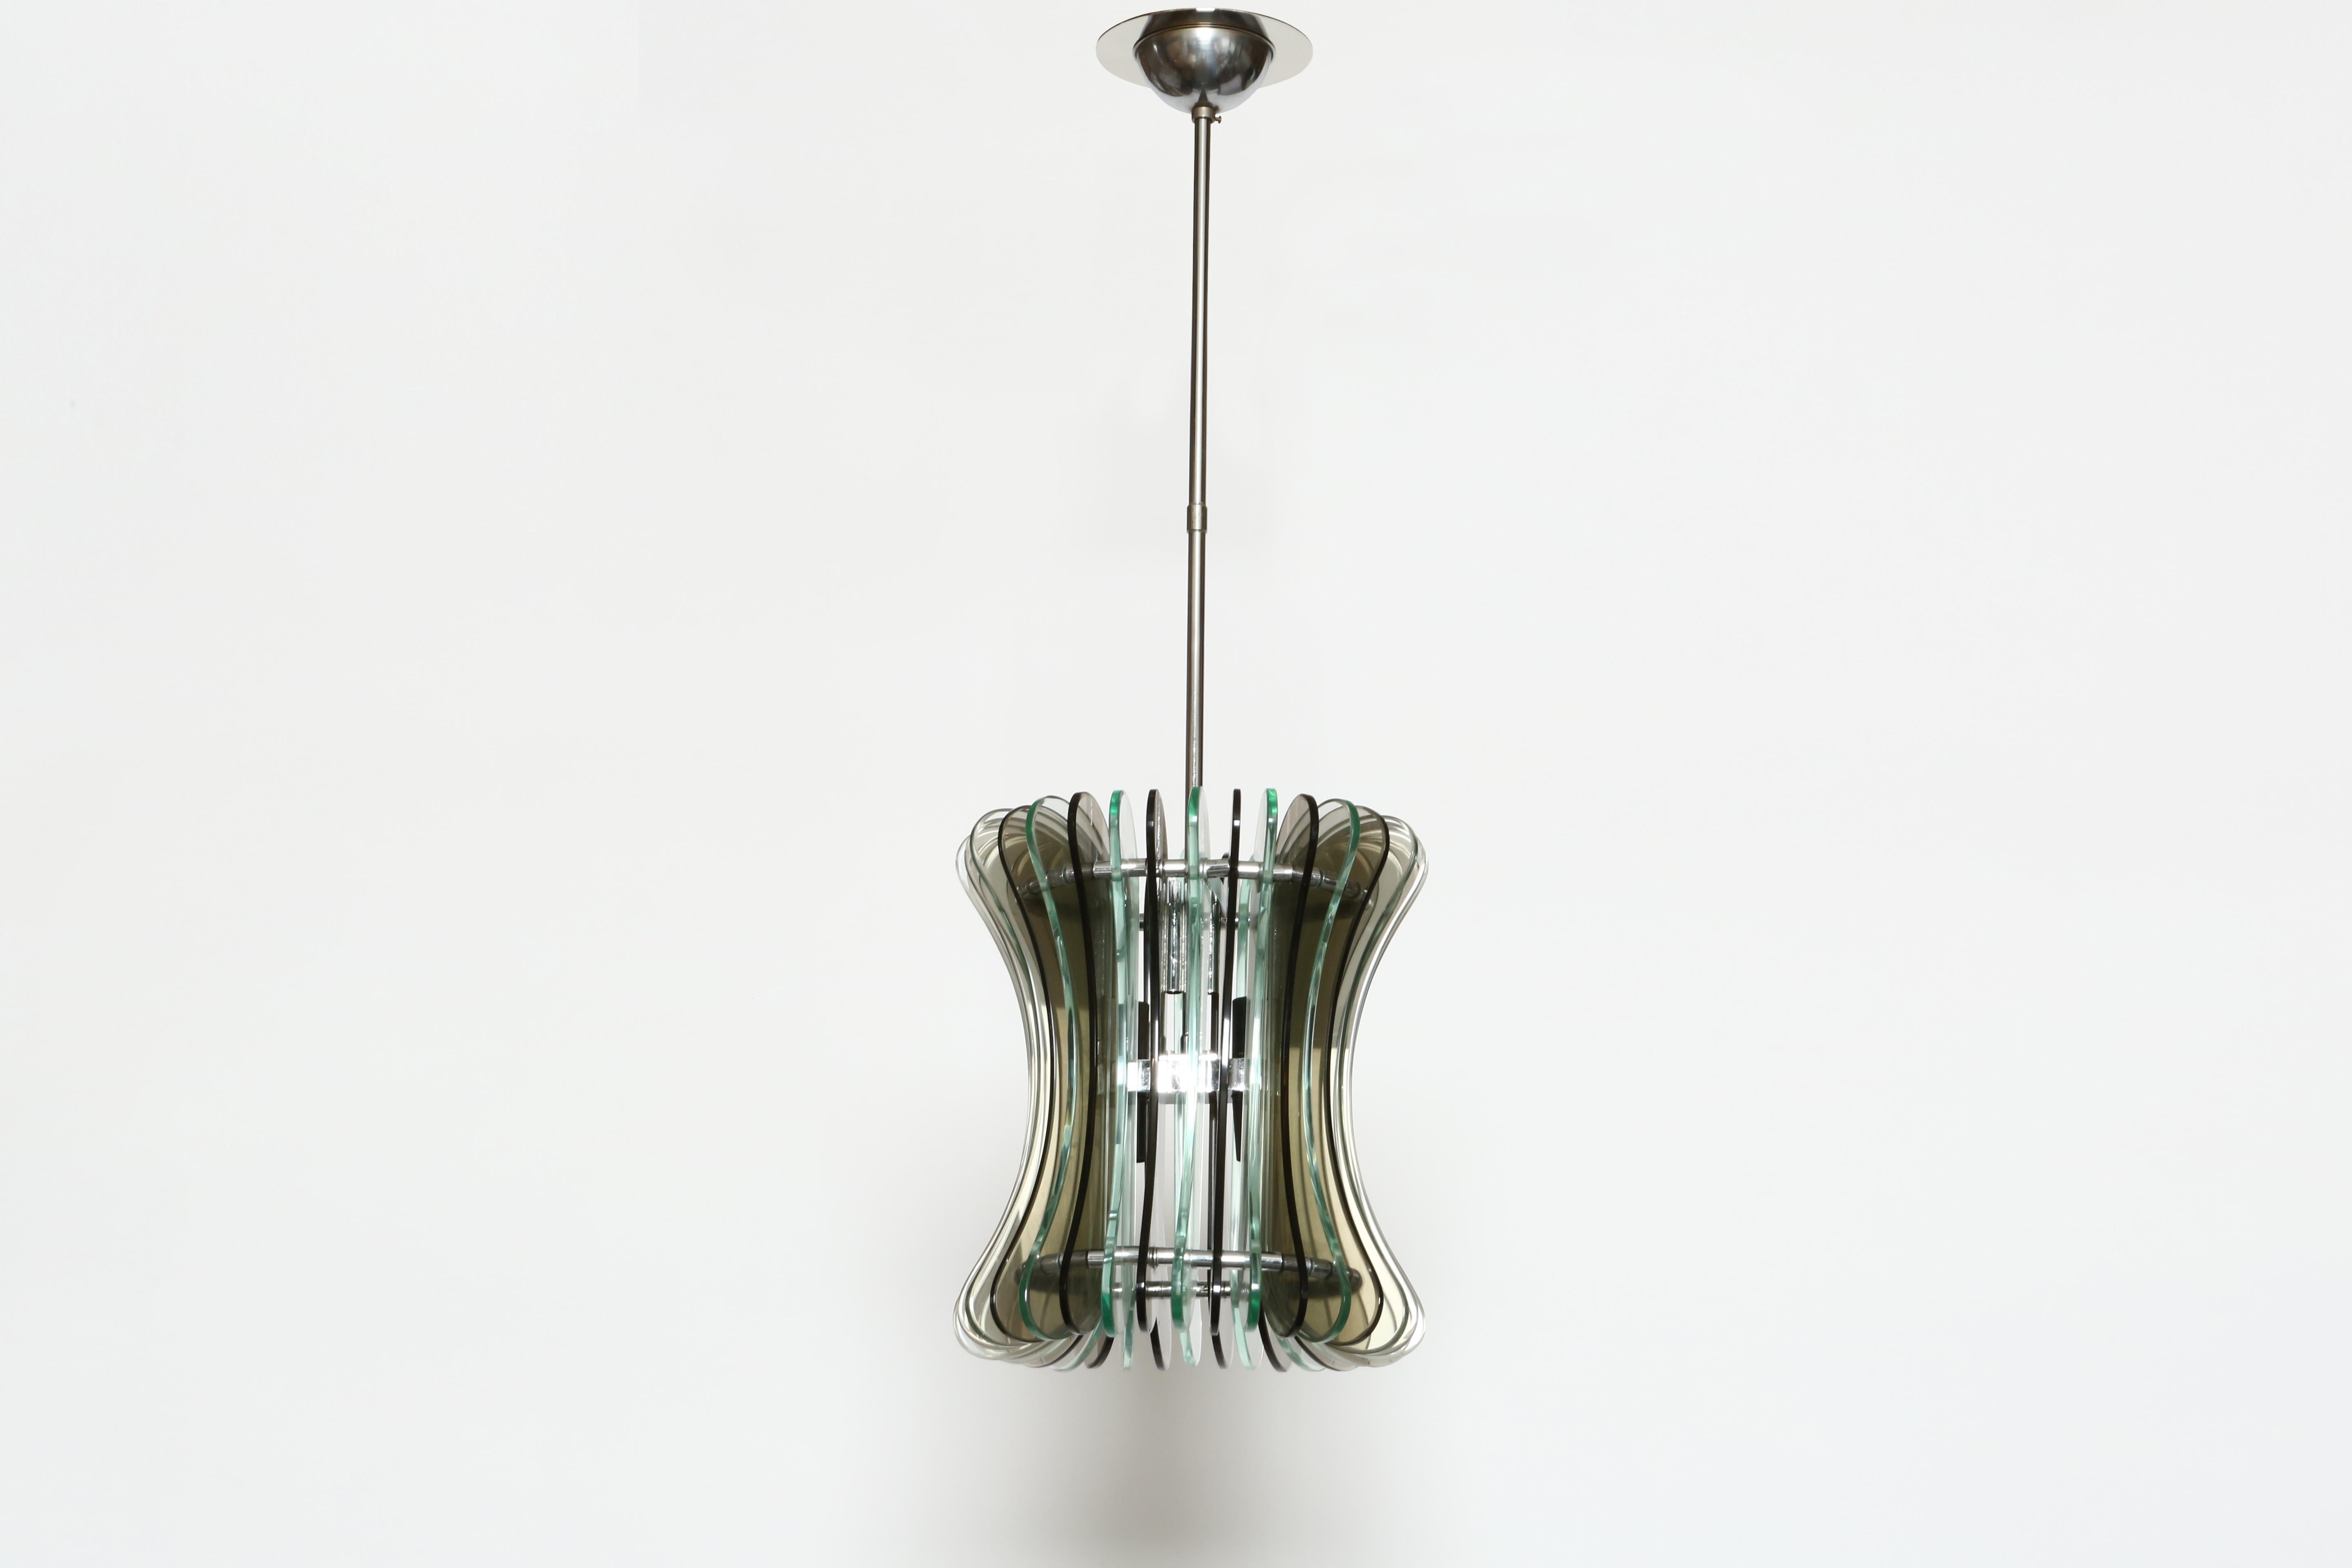 Suspension ceiling light by Veca.
Designed and manufactured in Italy in 1970s
Smoked colored glass in 2 tones, chrome plated frame.
Height adjustable.
Four candelabra sockets.
Complimentary US rewiring upon request.
 